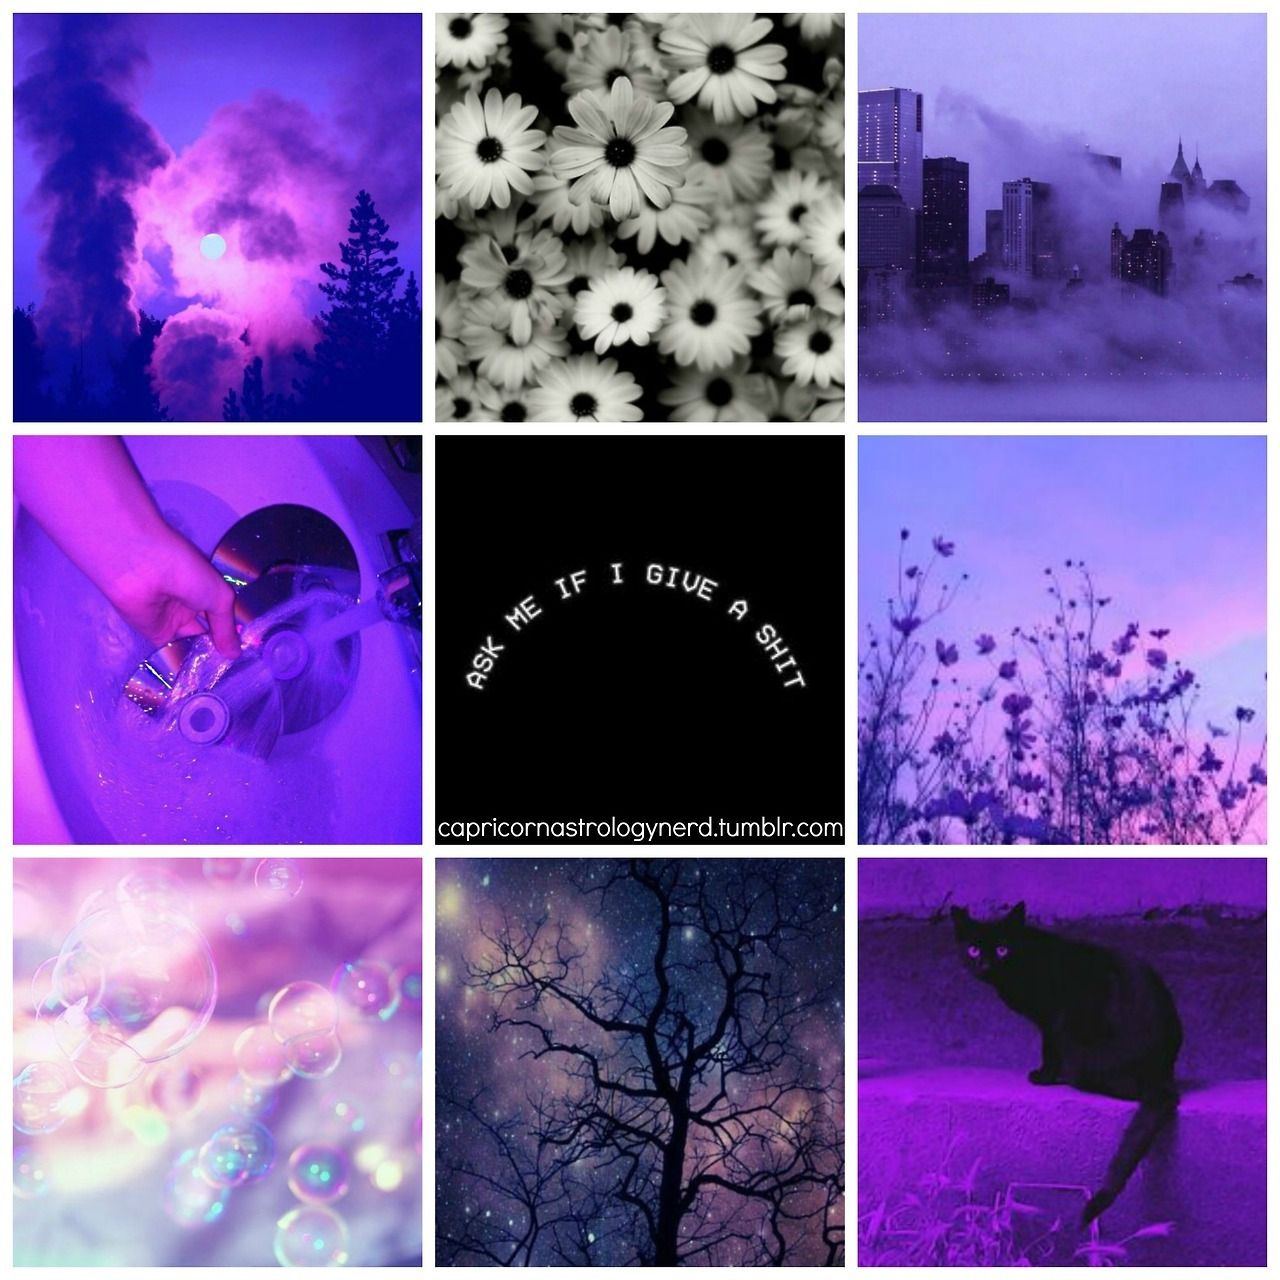 Aesthetic collage of purple and blue images including flowers, a city, and a cat. - Capricorn